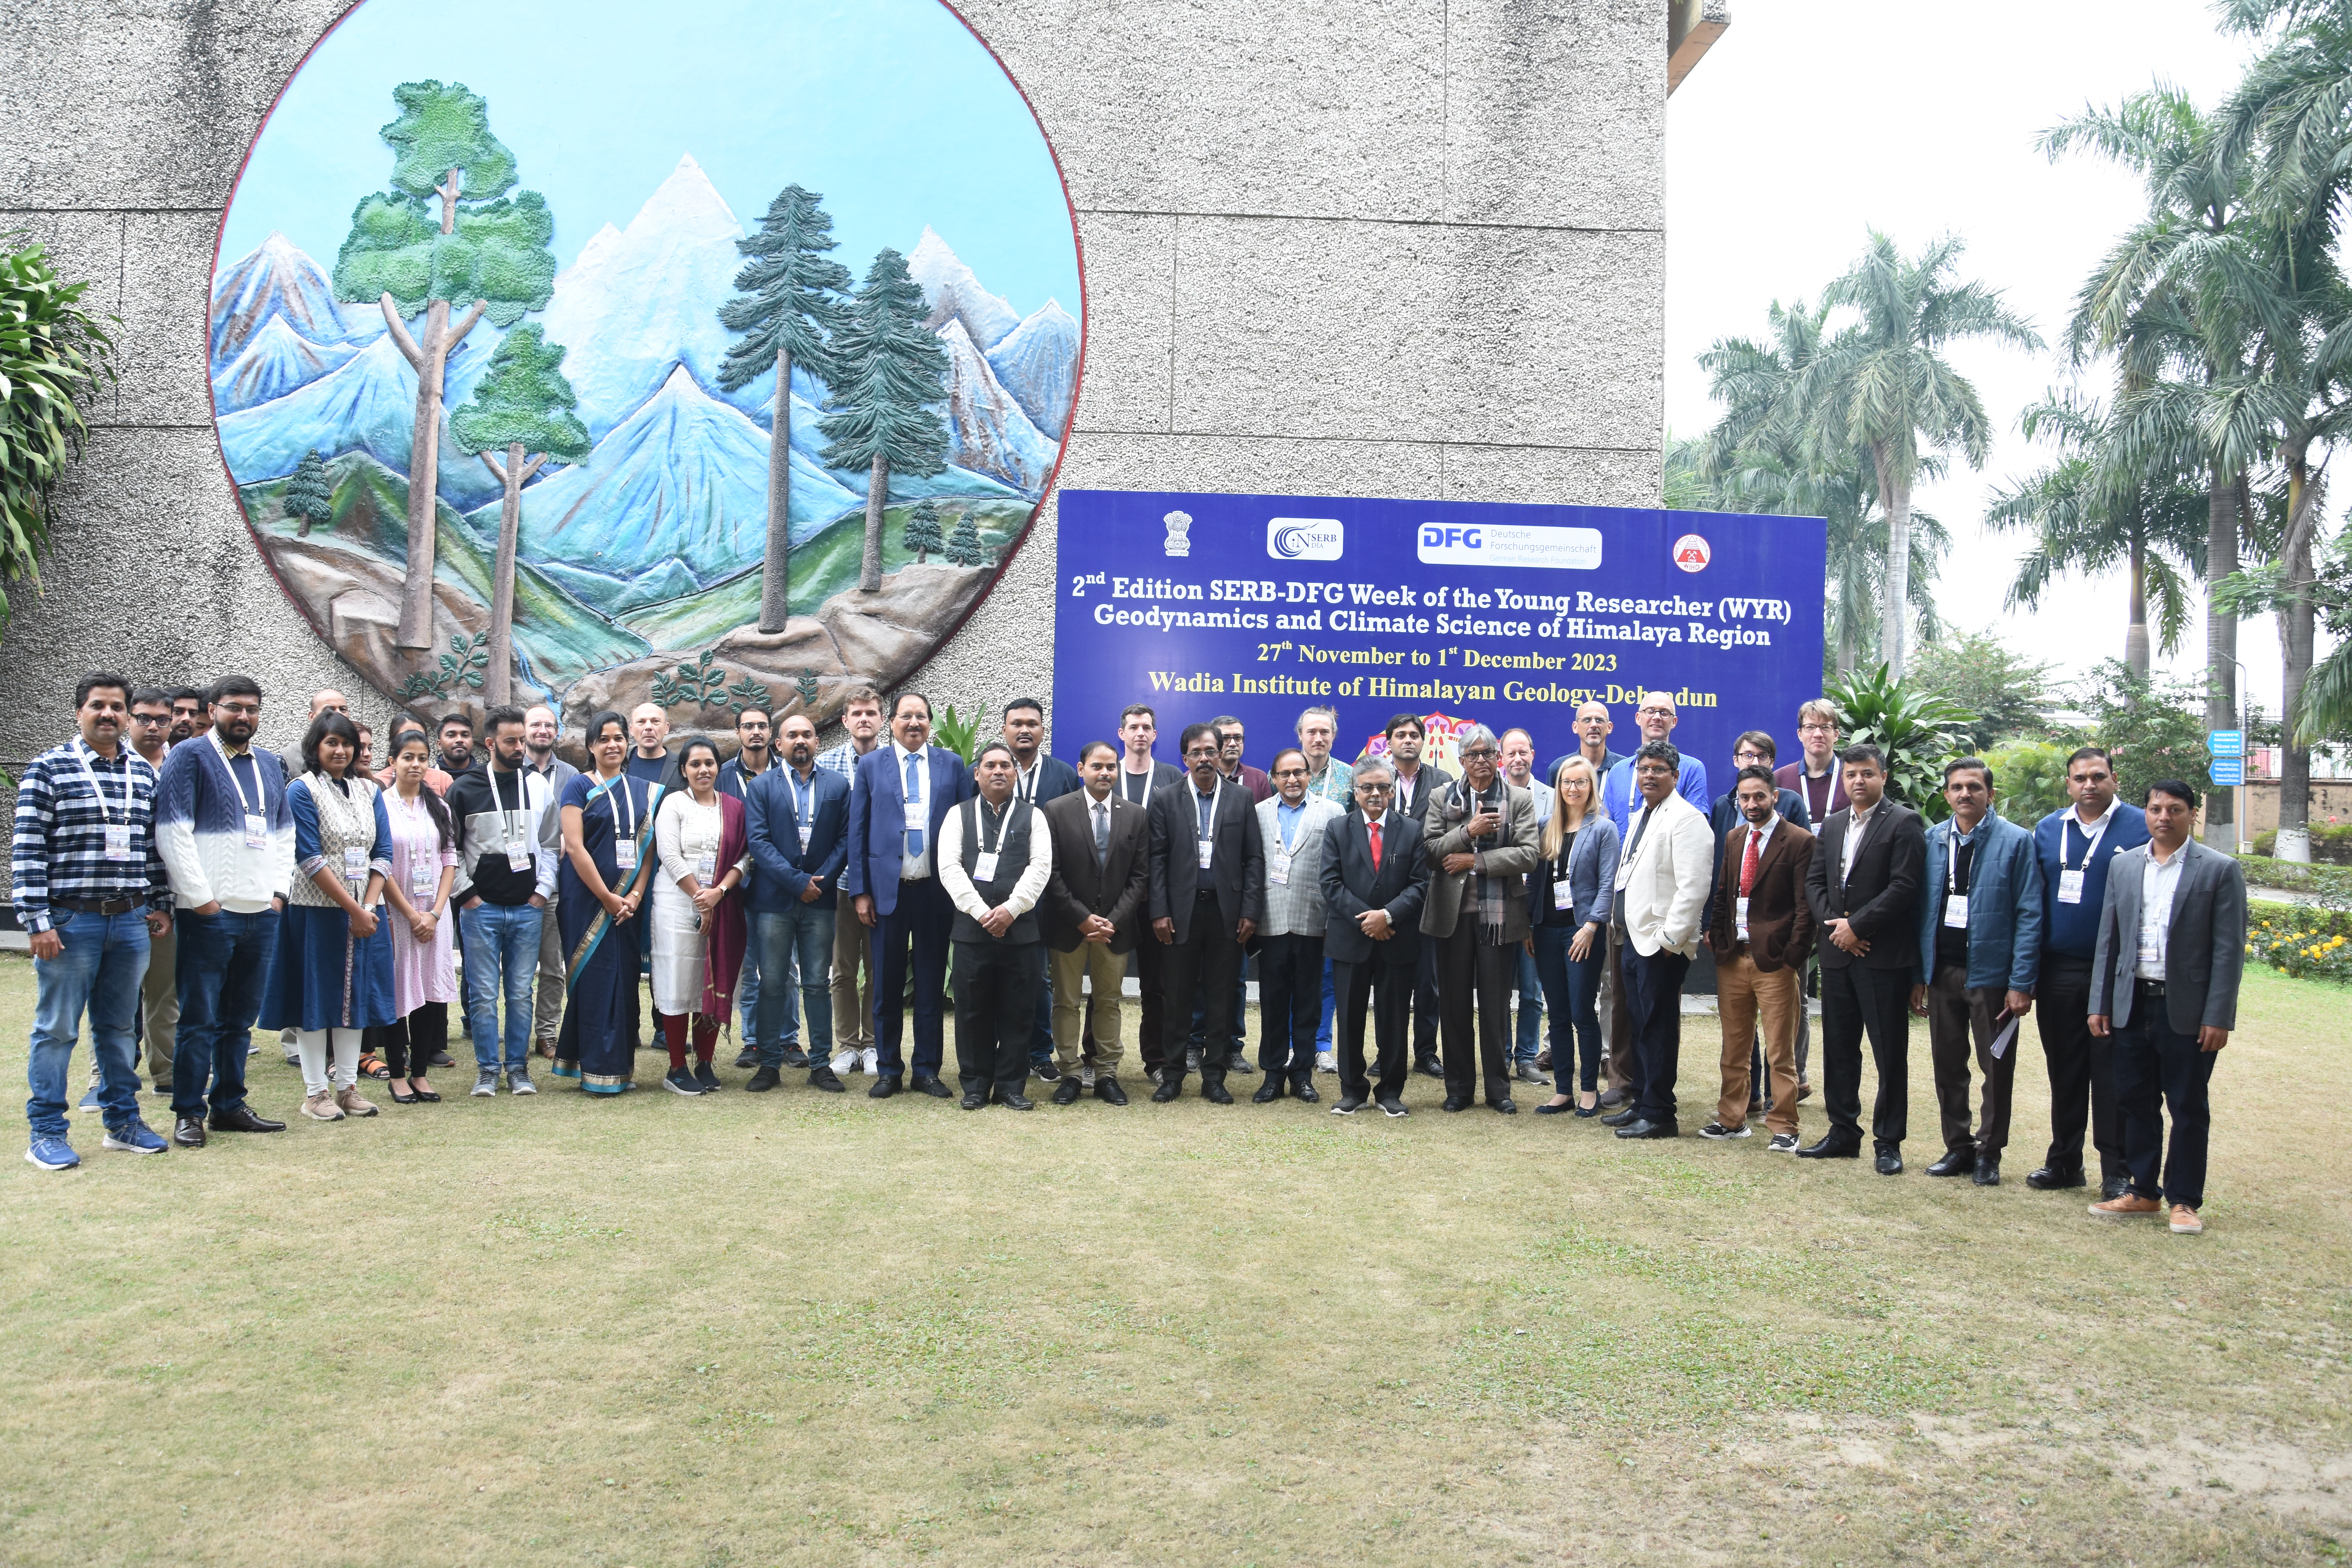 Participants of the Indo-German Week of the Young Researcher 2023